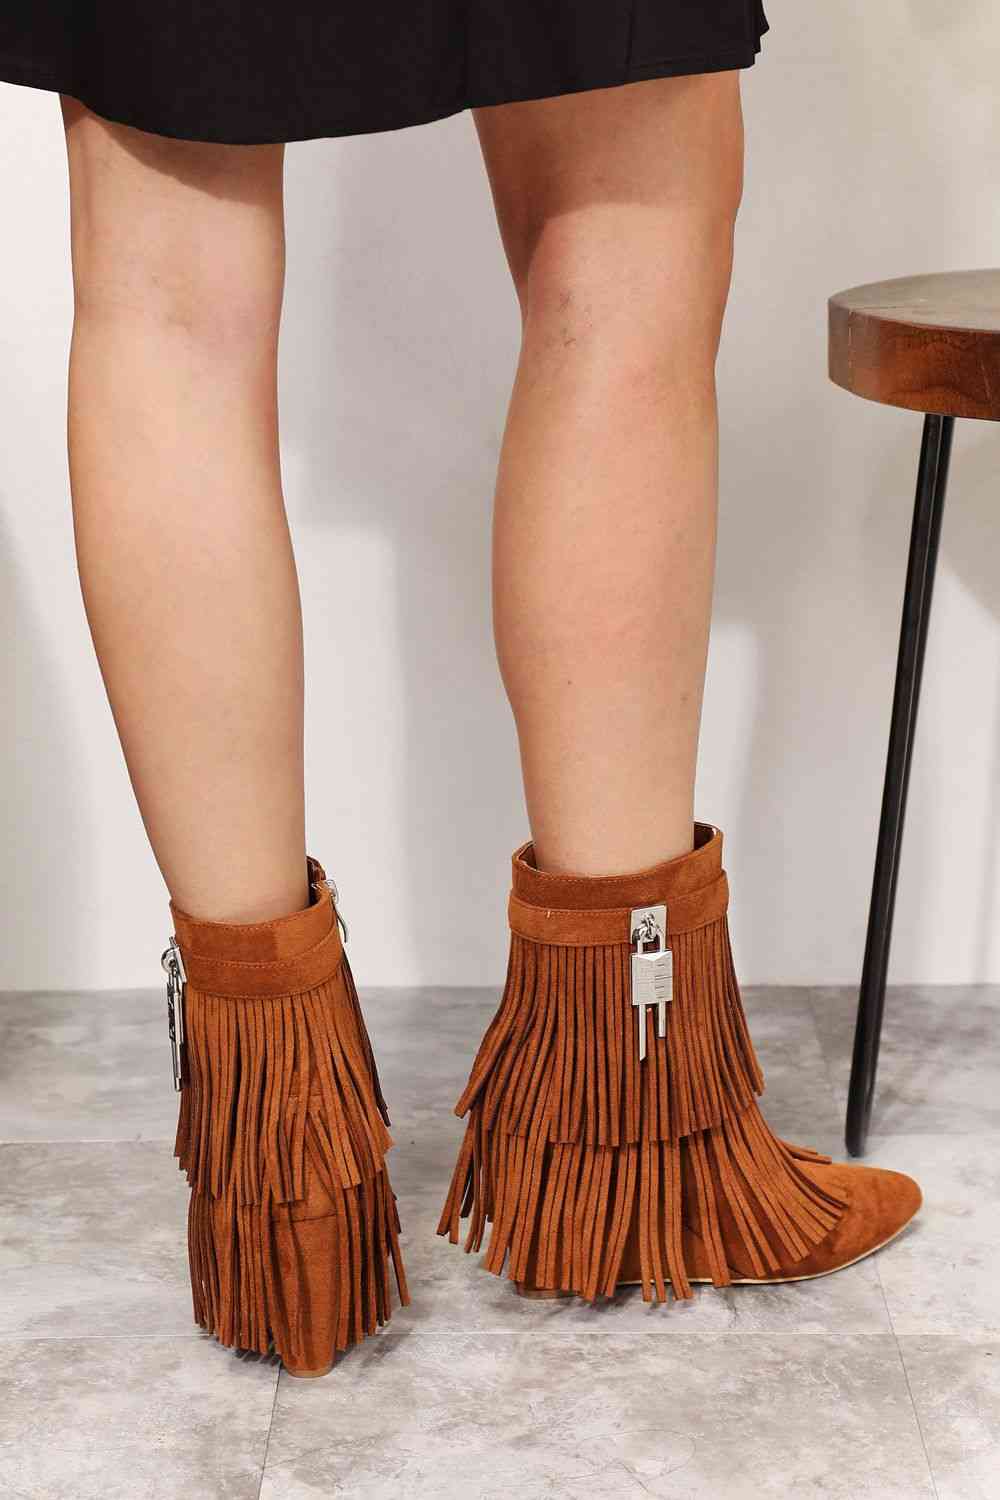 Tassel Wedge Heel Ankle Booties - Mythical Kitty Boutique